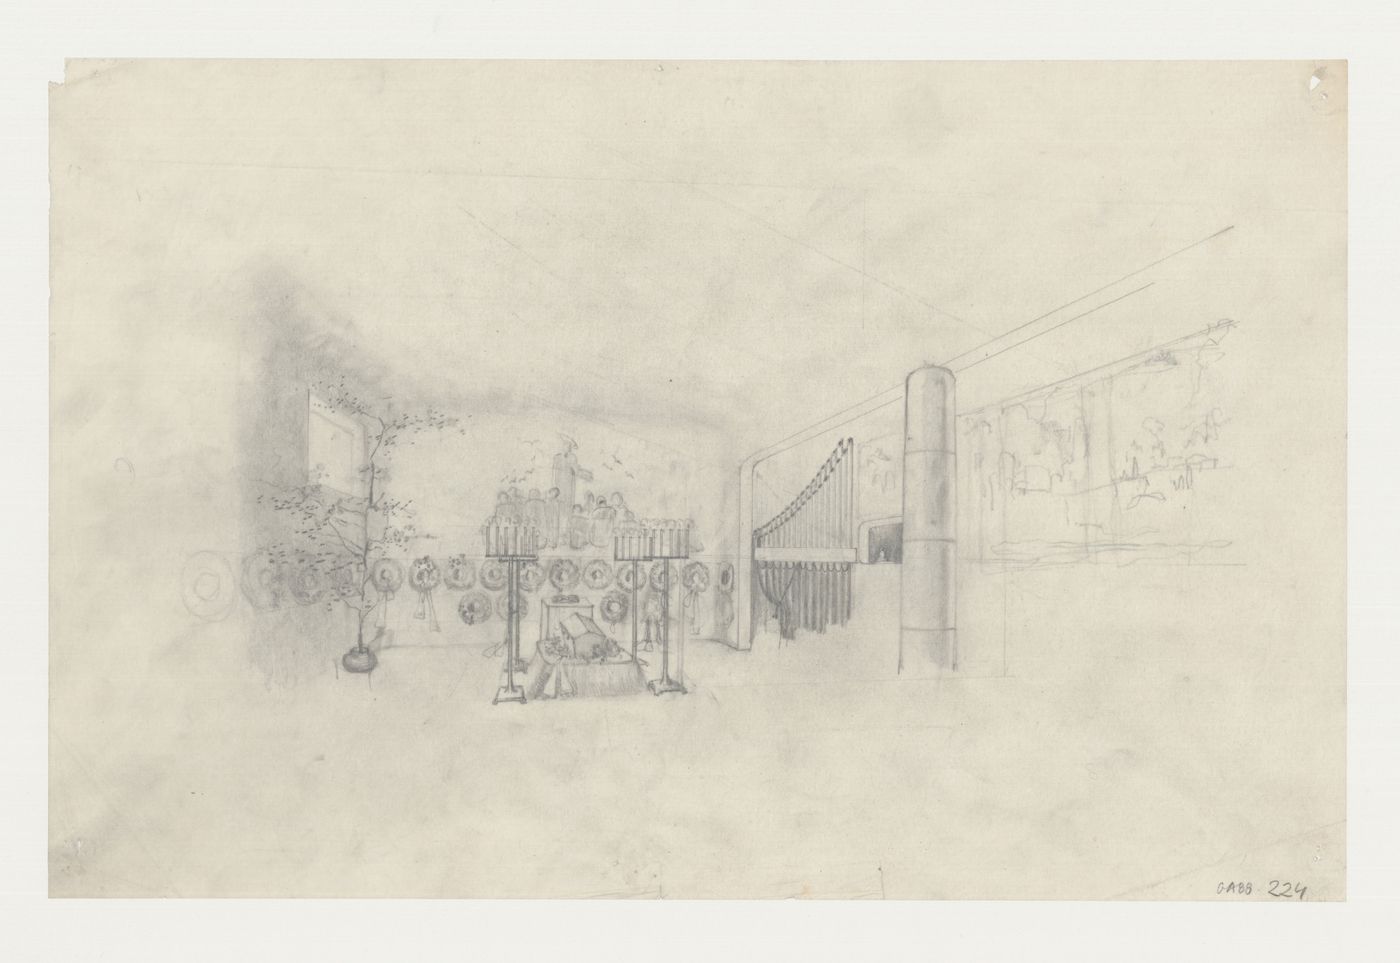 Interior sketch perspective for the Chapel of the Holy Cross showing a mural and a service underway, Woodland Crematorium, Woodland Cemetery, Stockholm, Sweden